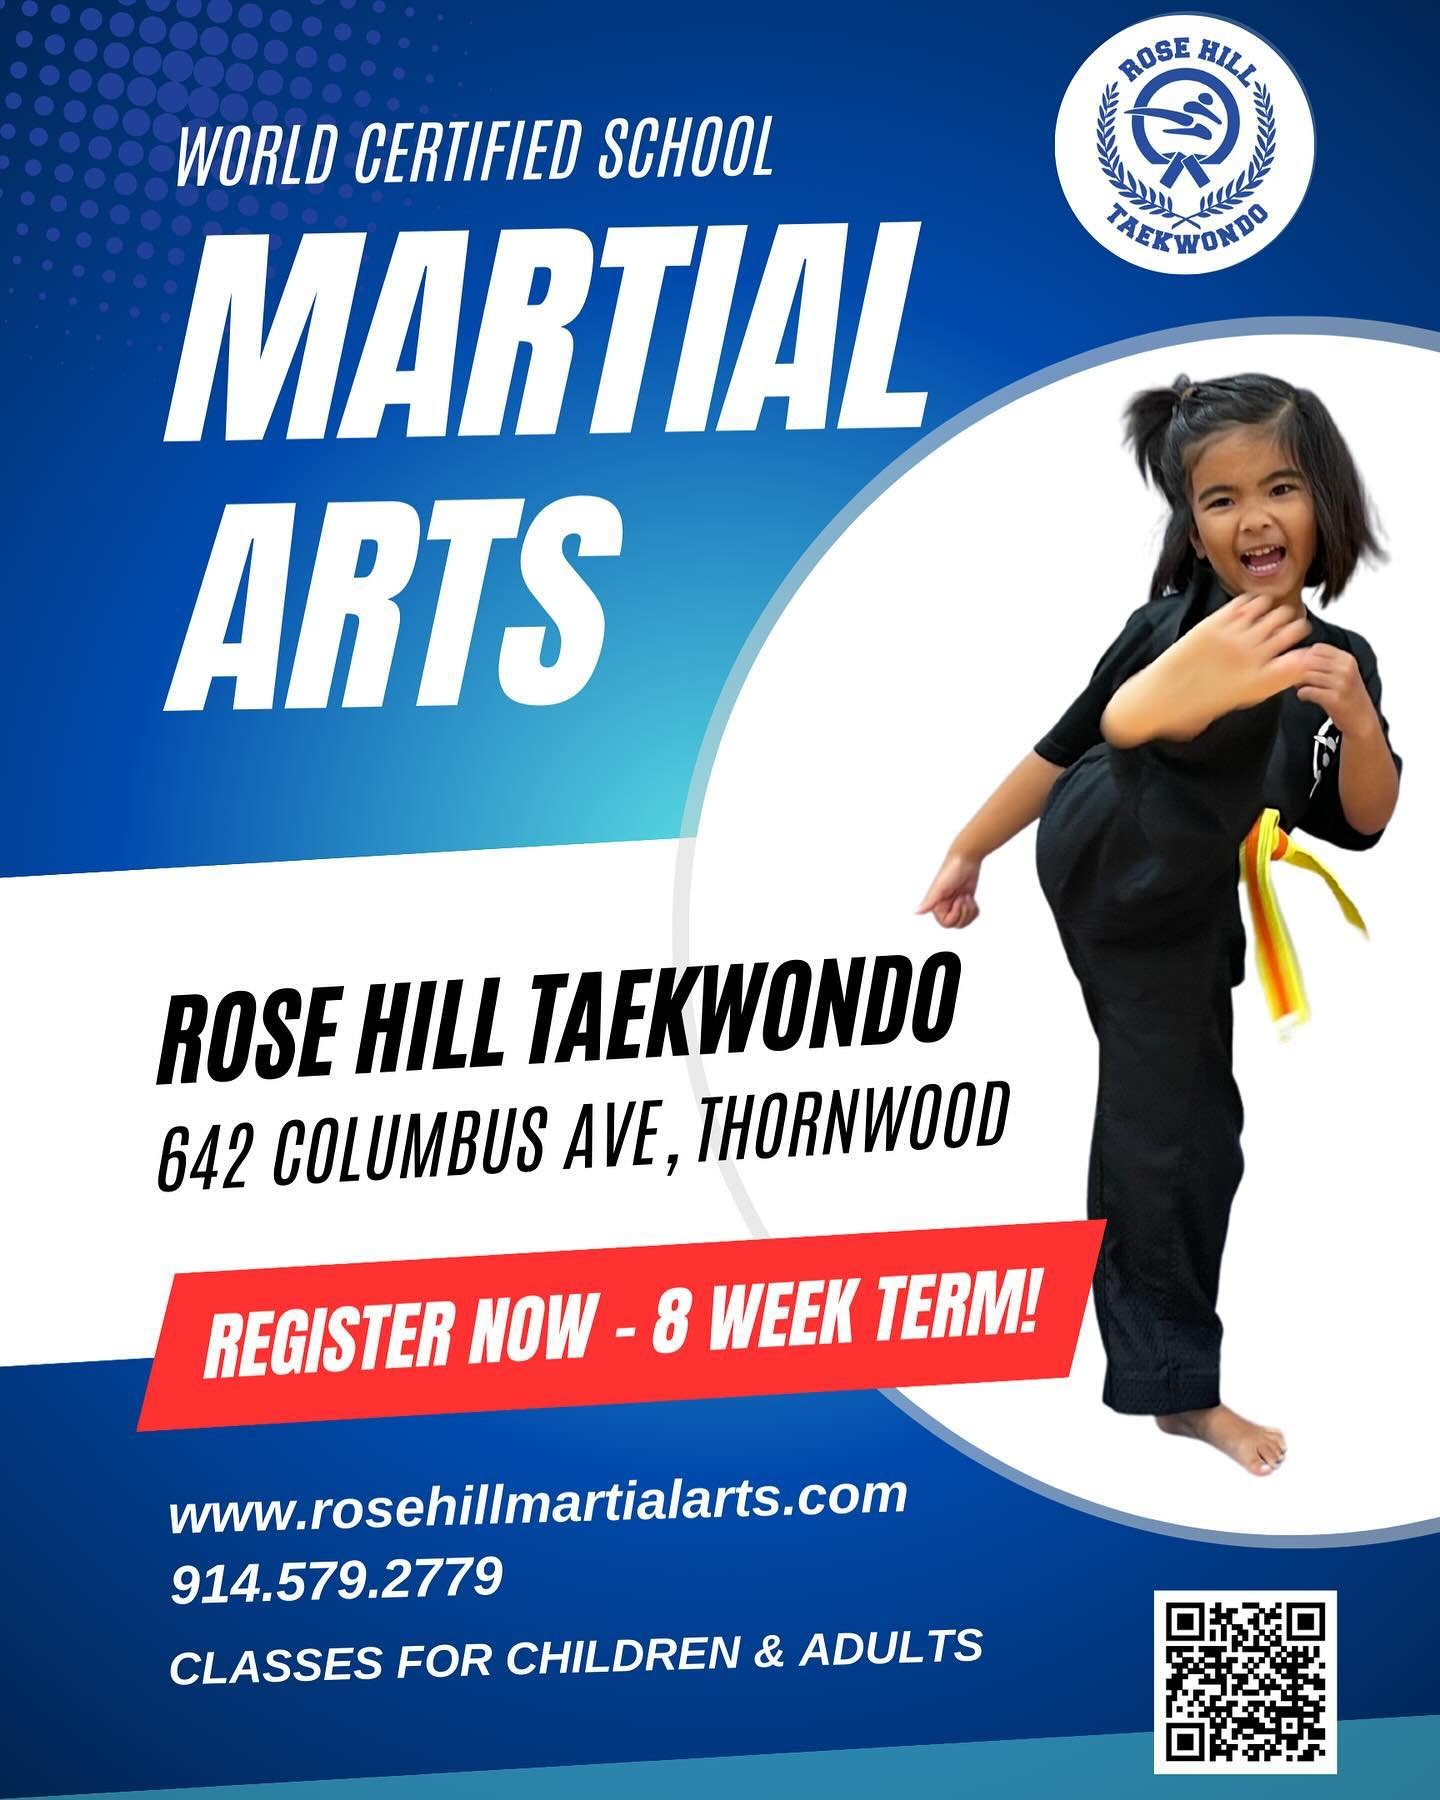 Are you ready to embark on your martial arts journey? Enroll now in our 8-Week Introductory Program and experience the expertise of our world-certified instructors. With classes tailored for both adults and children, spaces are filling up fast. Secur